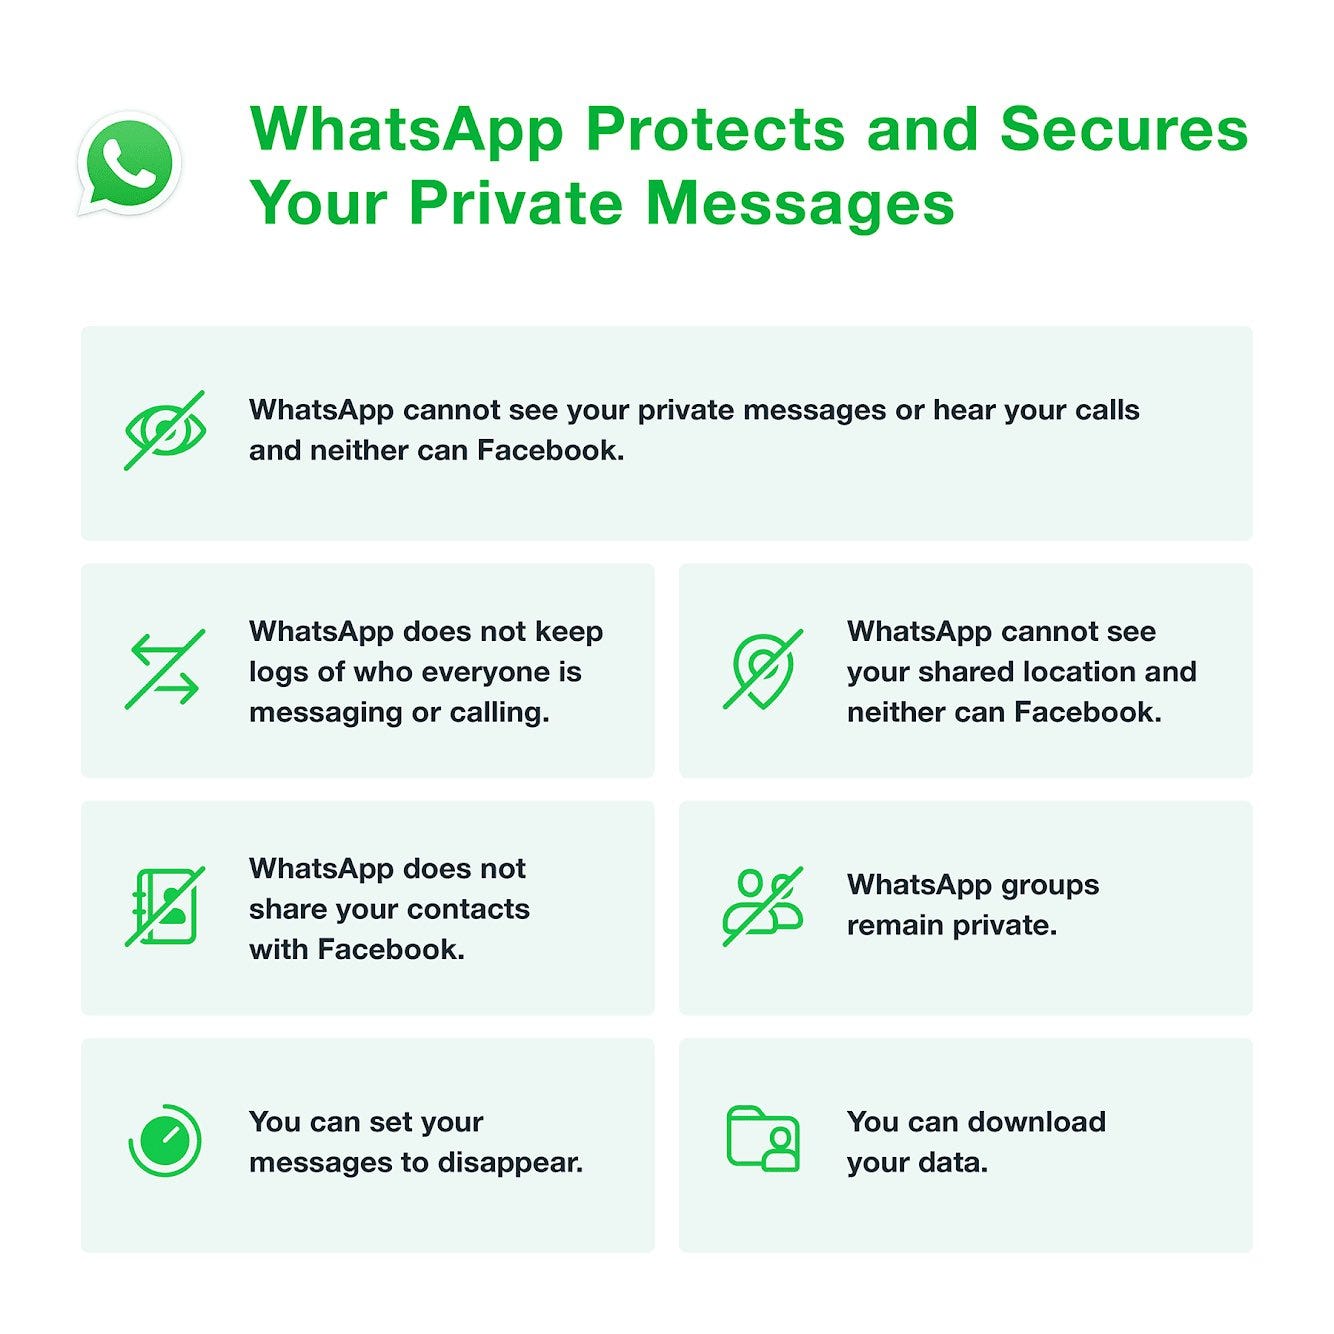 WhatsApp Protects and Secures Your Private Massages